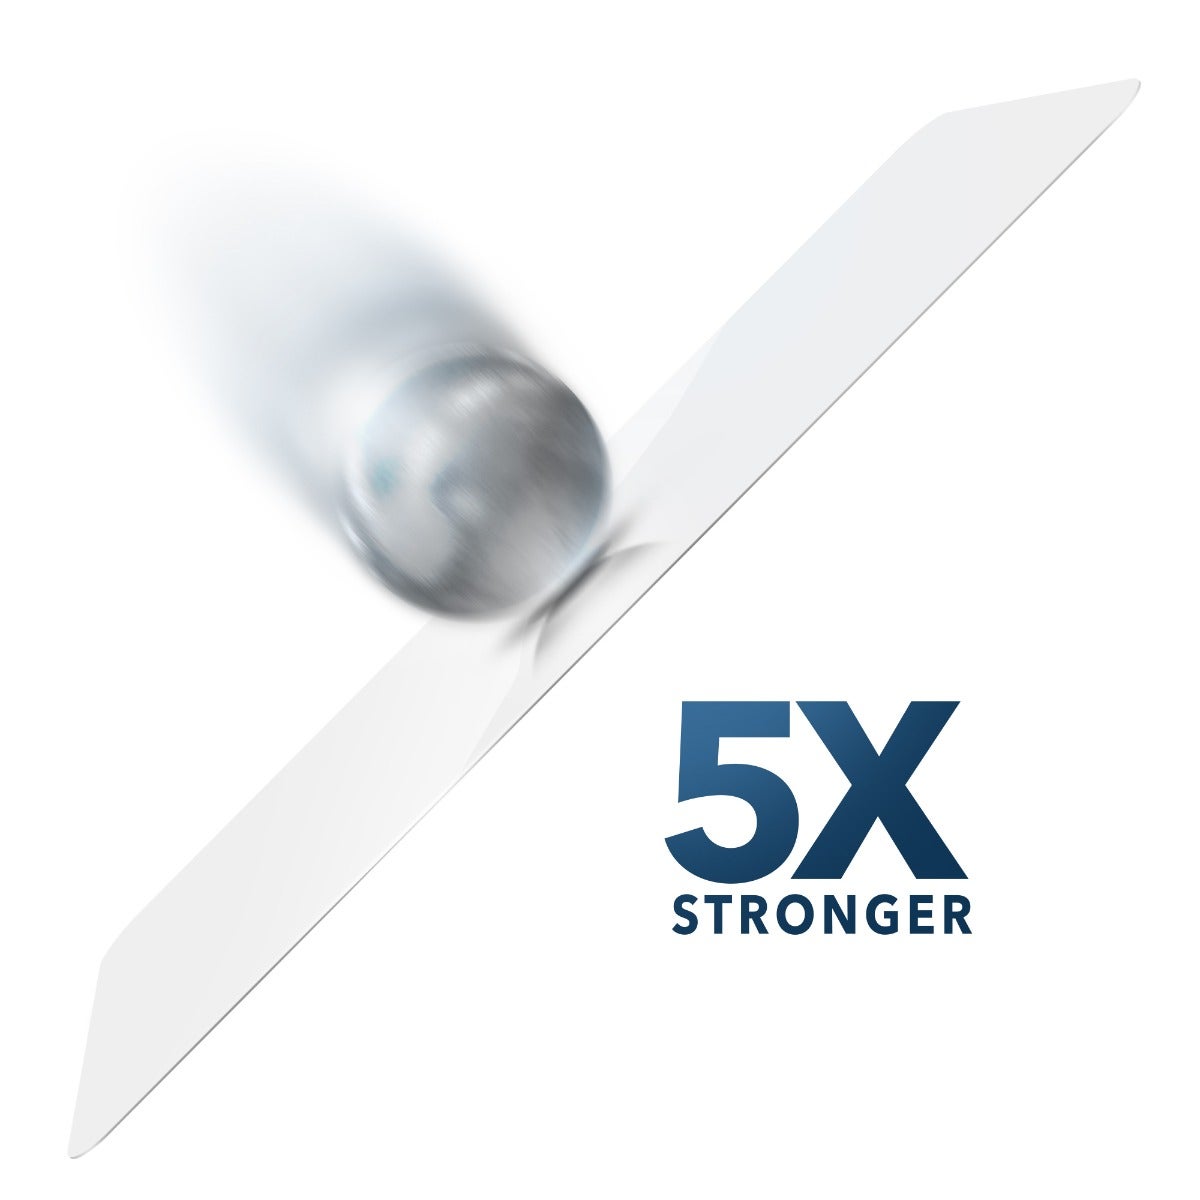 Maximum Scratch Prevention & 5X strength
||Ion exchange technology increases surface compression for increased hardness and scratch-resistance.
